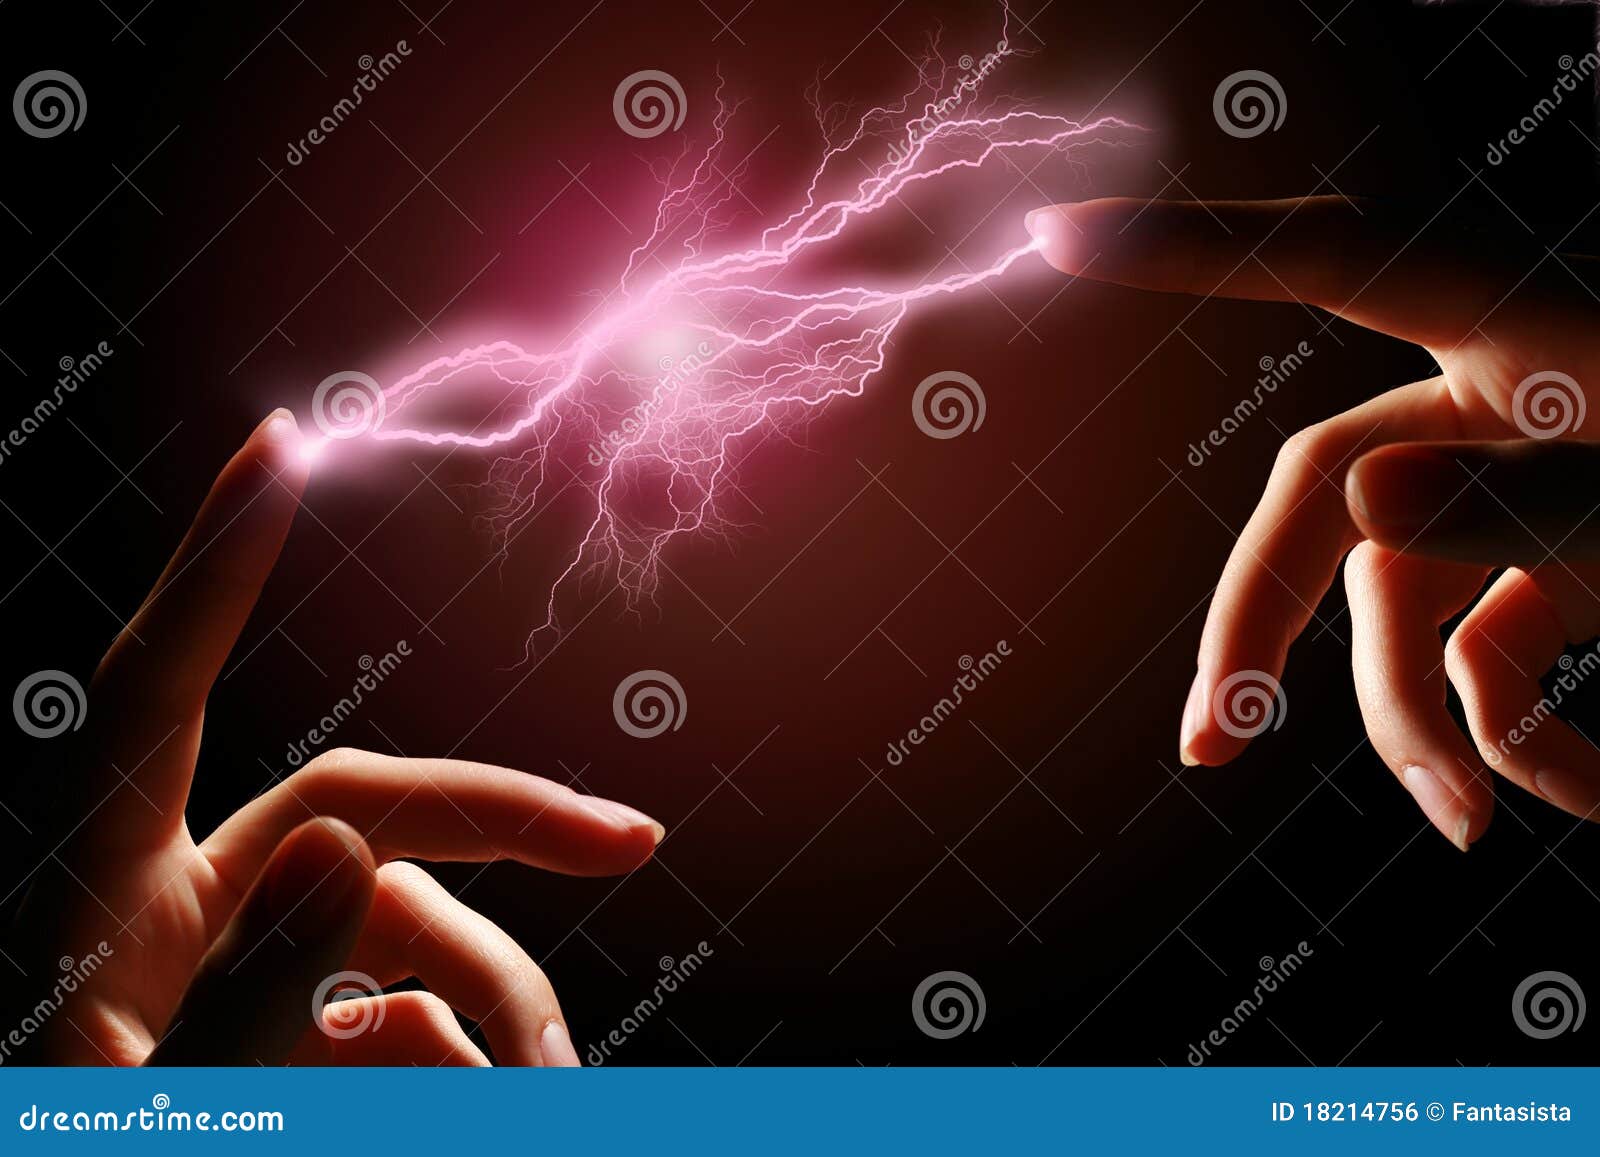 hands and electric discharge.